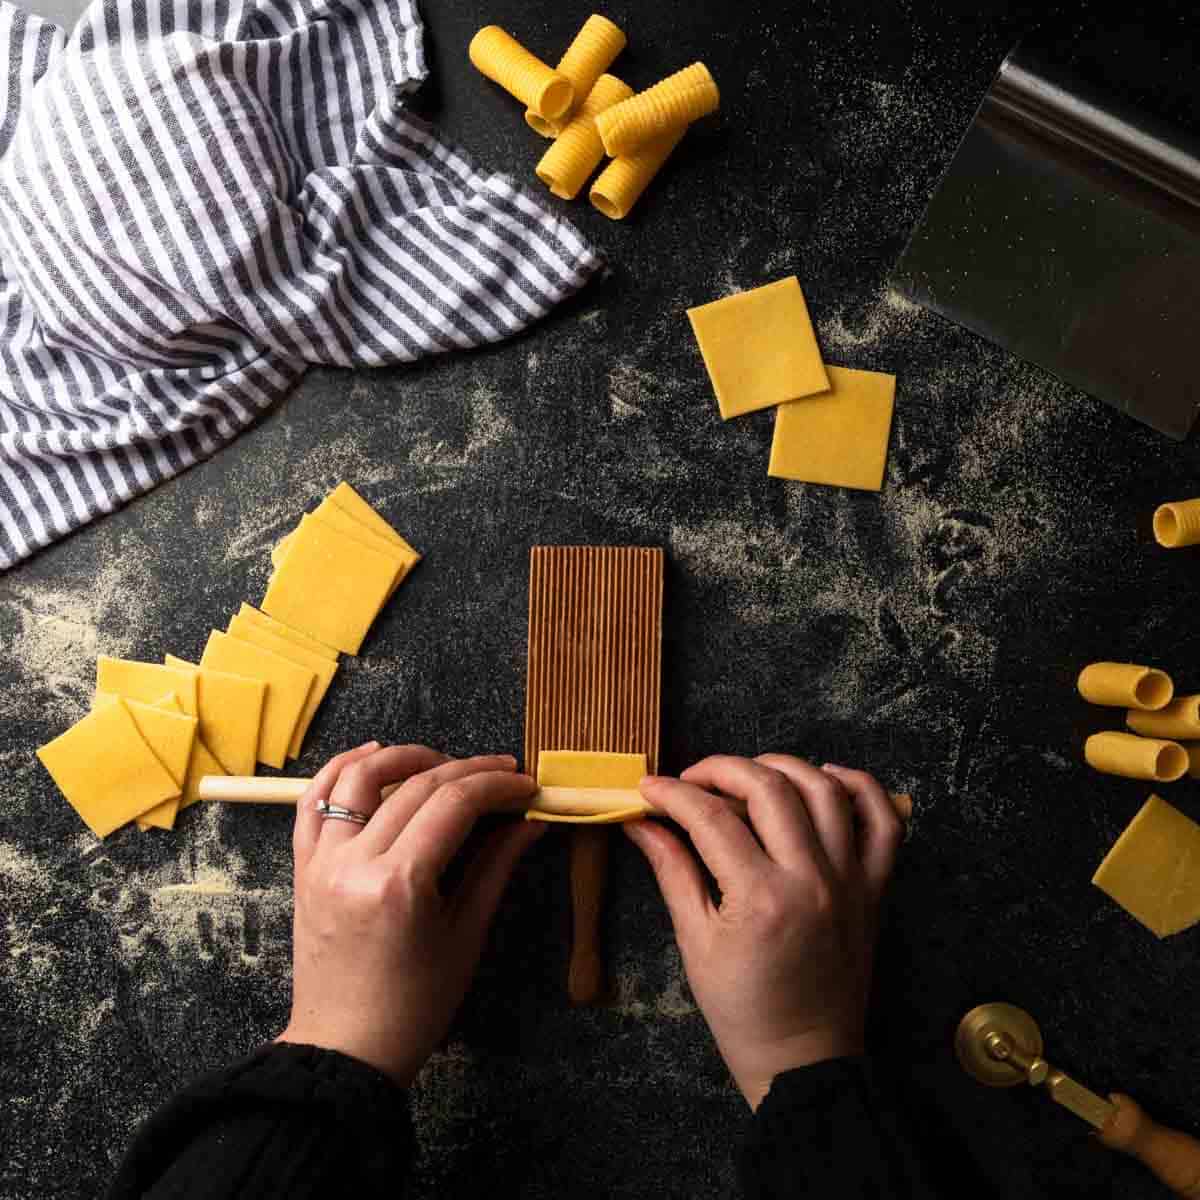 rolling a square of pasta dough around a wooden dowel over a gnocchi board